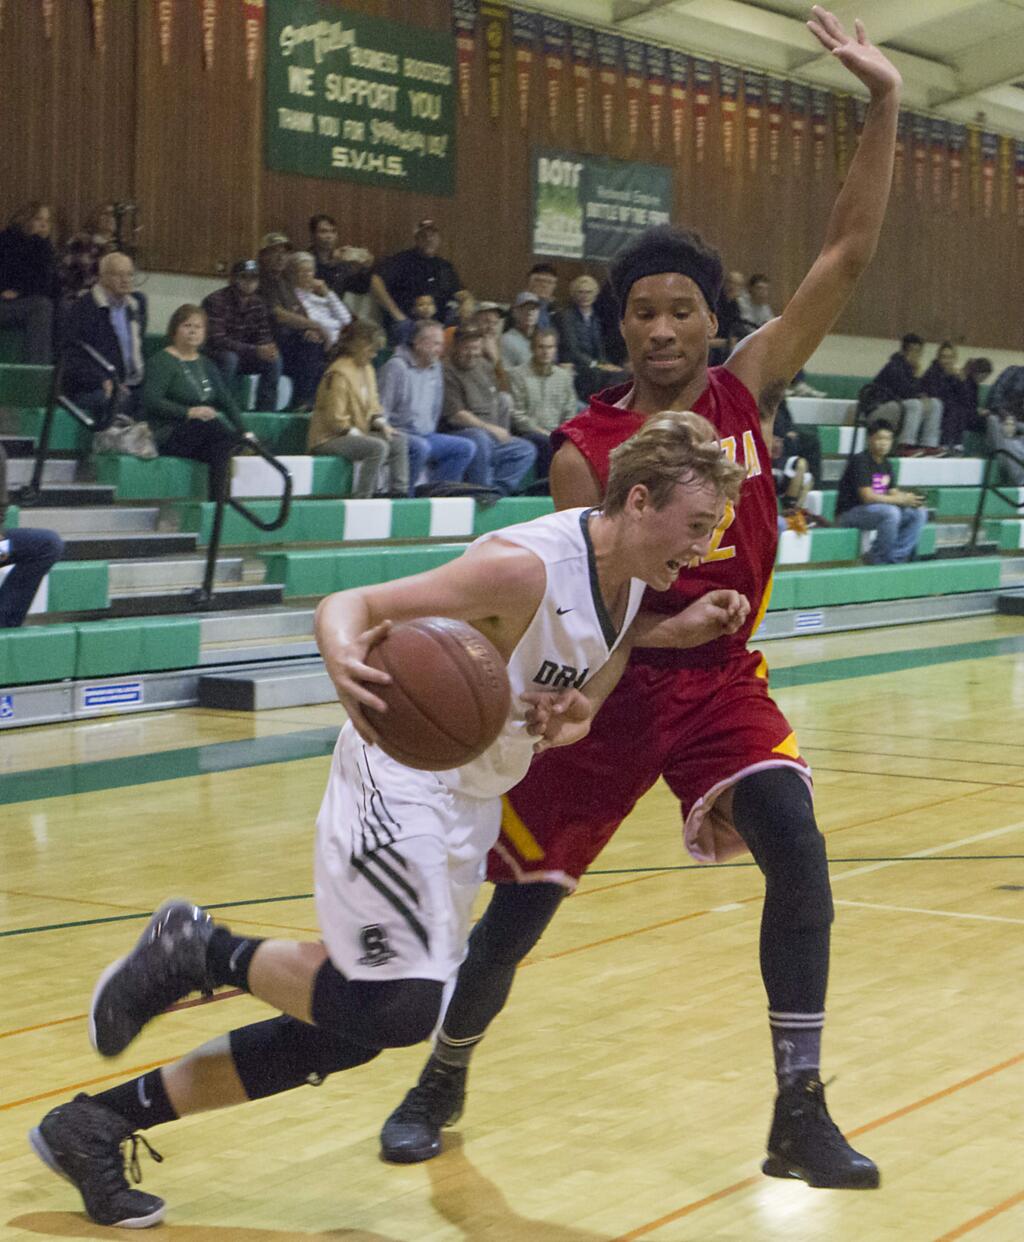 FORWARD LUCK SEVERSON drives hard agains a defender in non-league basketball play last week. The SVHS Dragons took third place in the Stokes Tournament in Kelseyville.